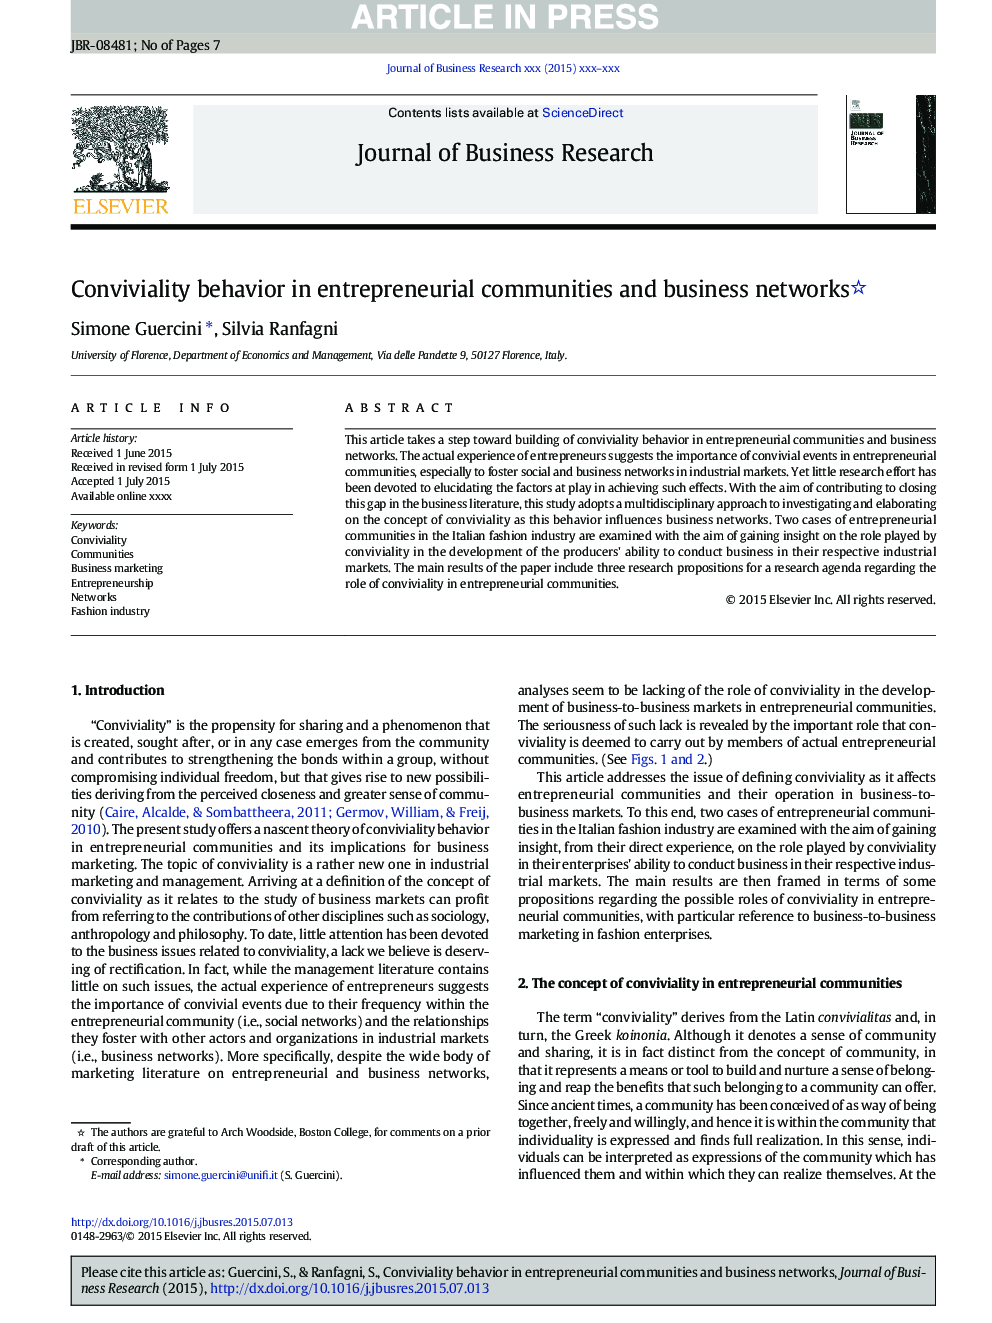 Conviviality behavior in entrepreneurial communities and business networks